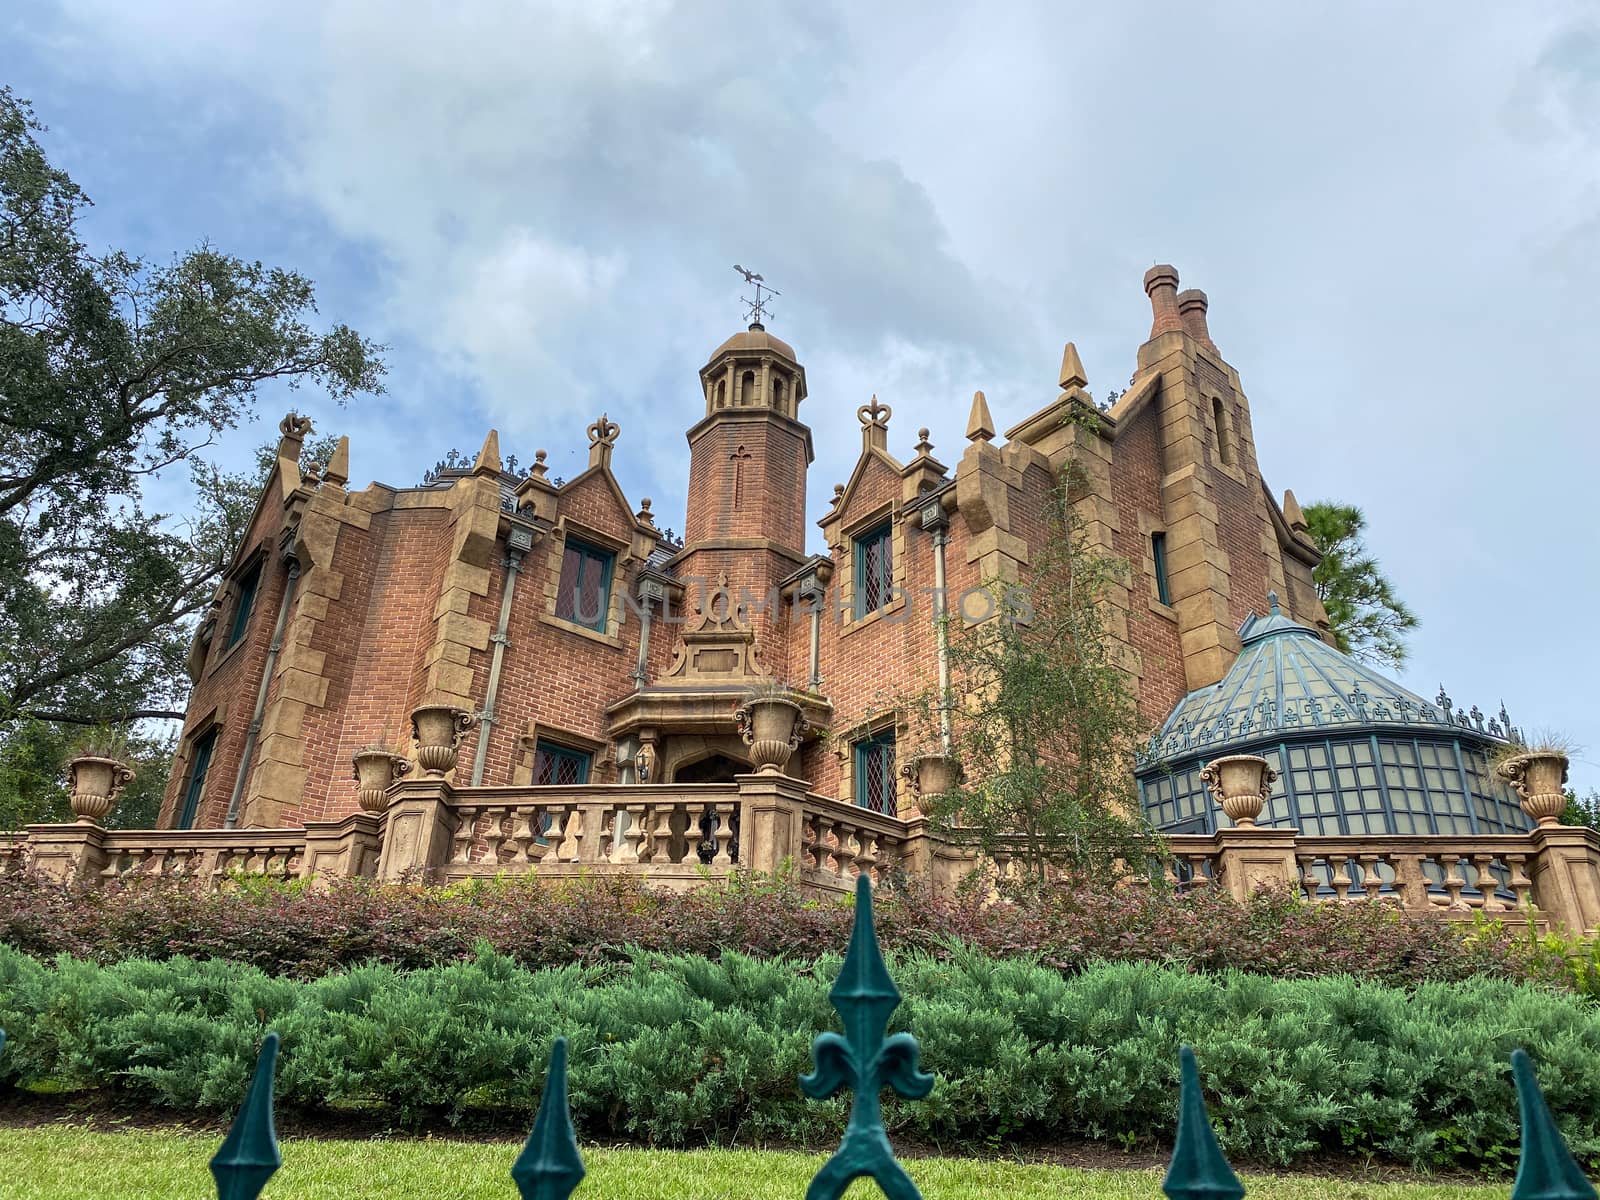 Orlando,FL/USA-10/21/20: A view of the exterior of the Haunted Mansion ride in the Magic Kingdom at  Walt Disney World Resorts in Orlando, FL.